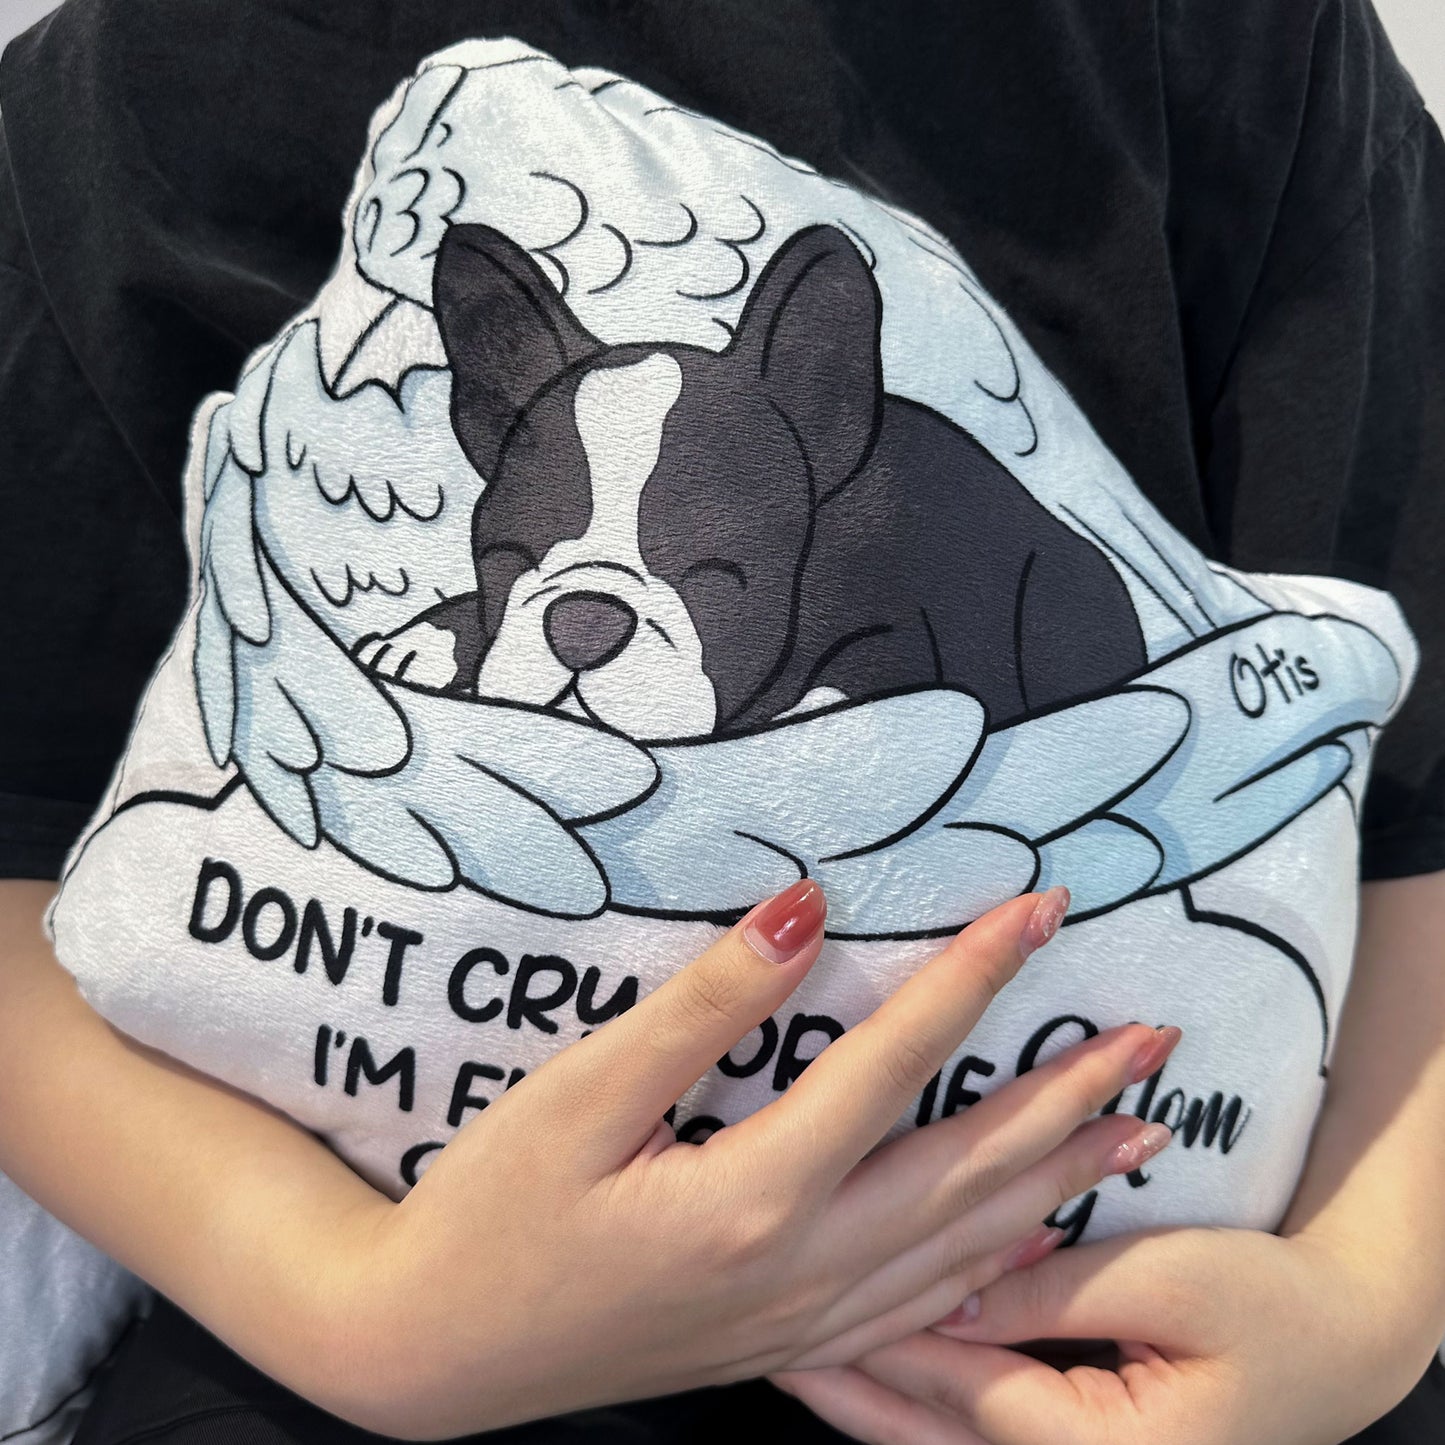 Don't Cry For Me - Custom Shaped Pillow